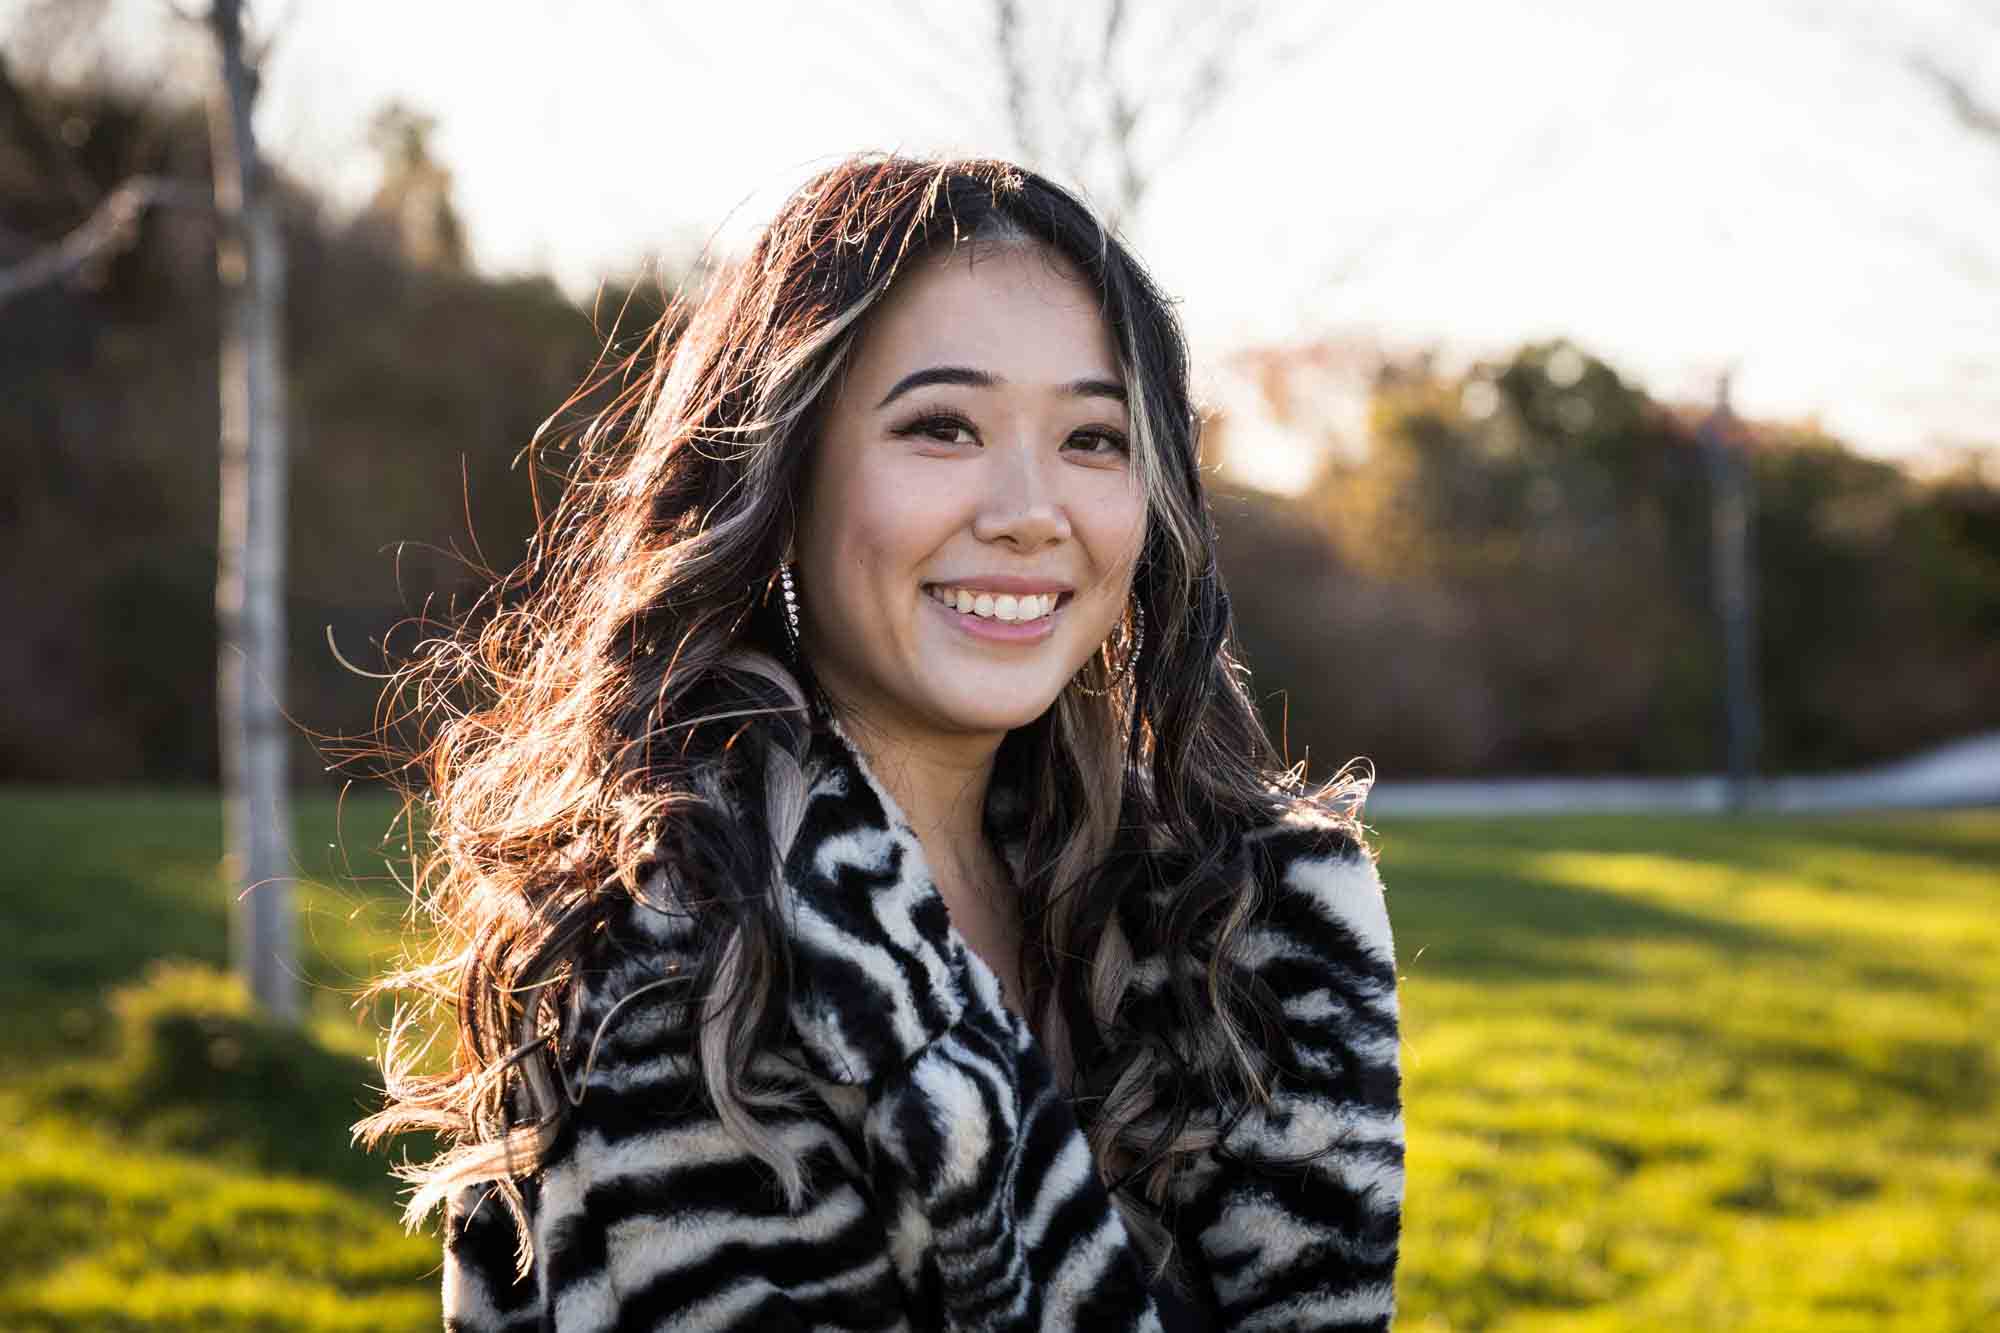 Smiling woman with long hair wearing zebra-print coat on Governors Island